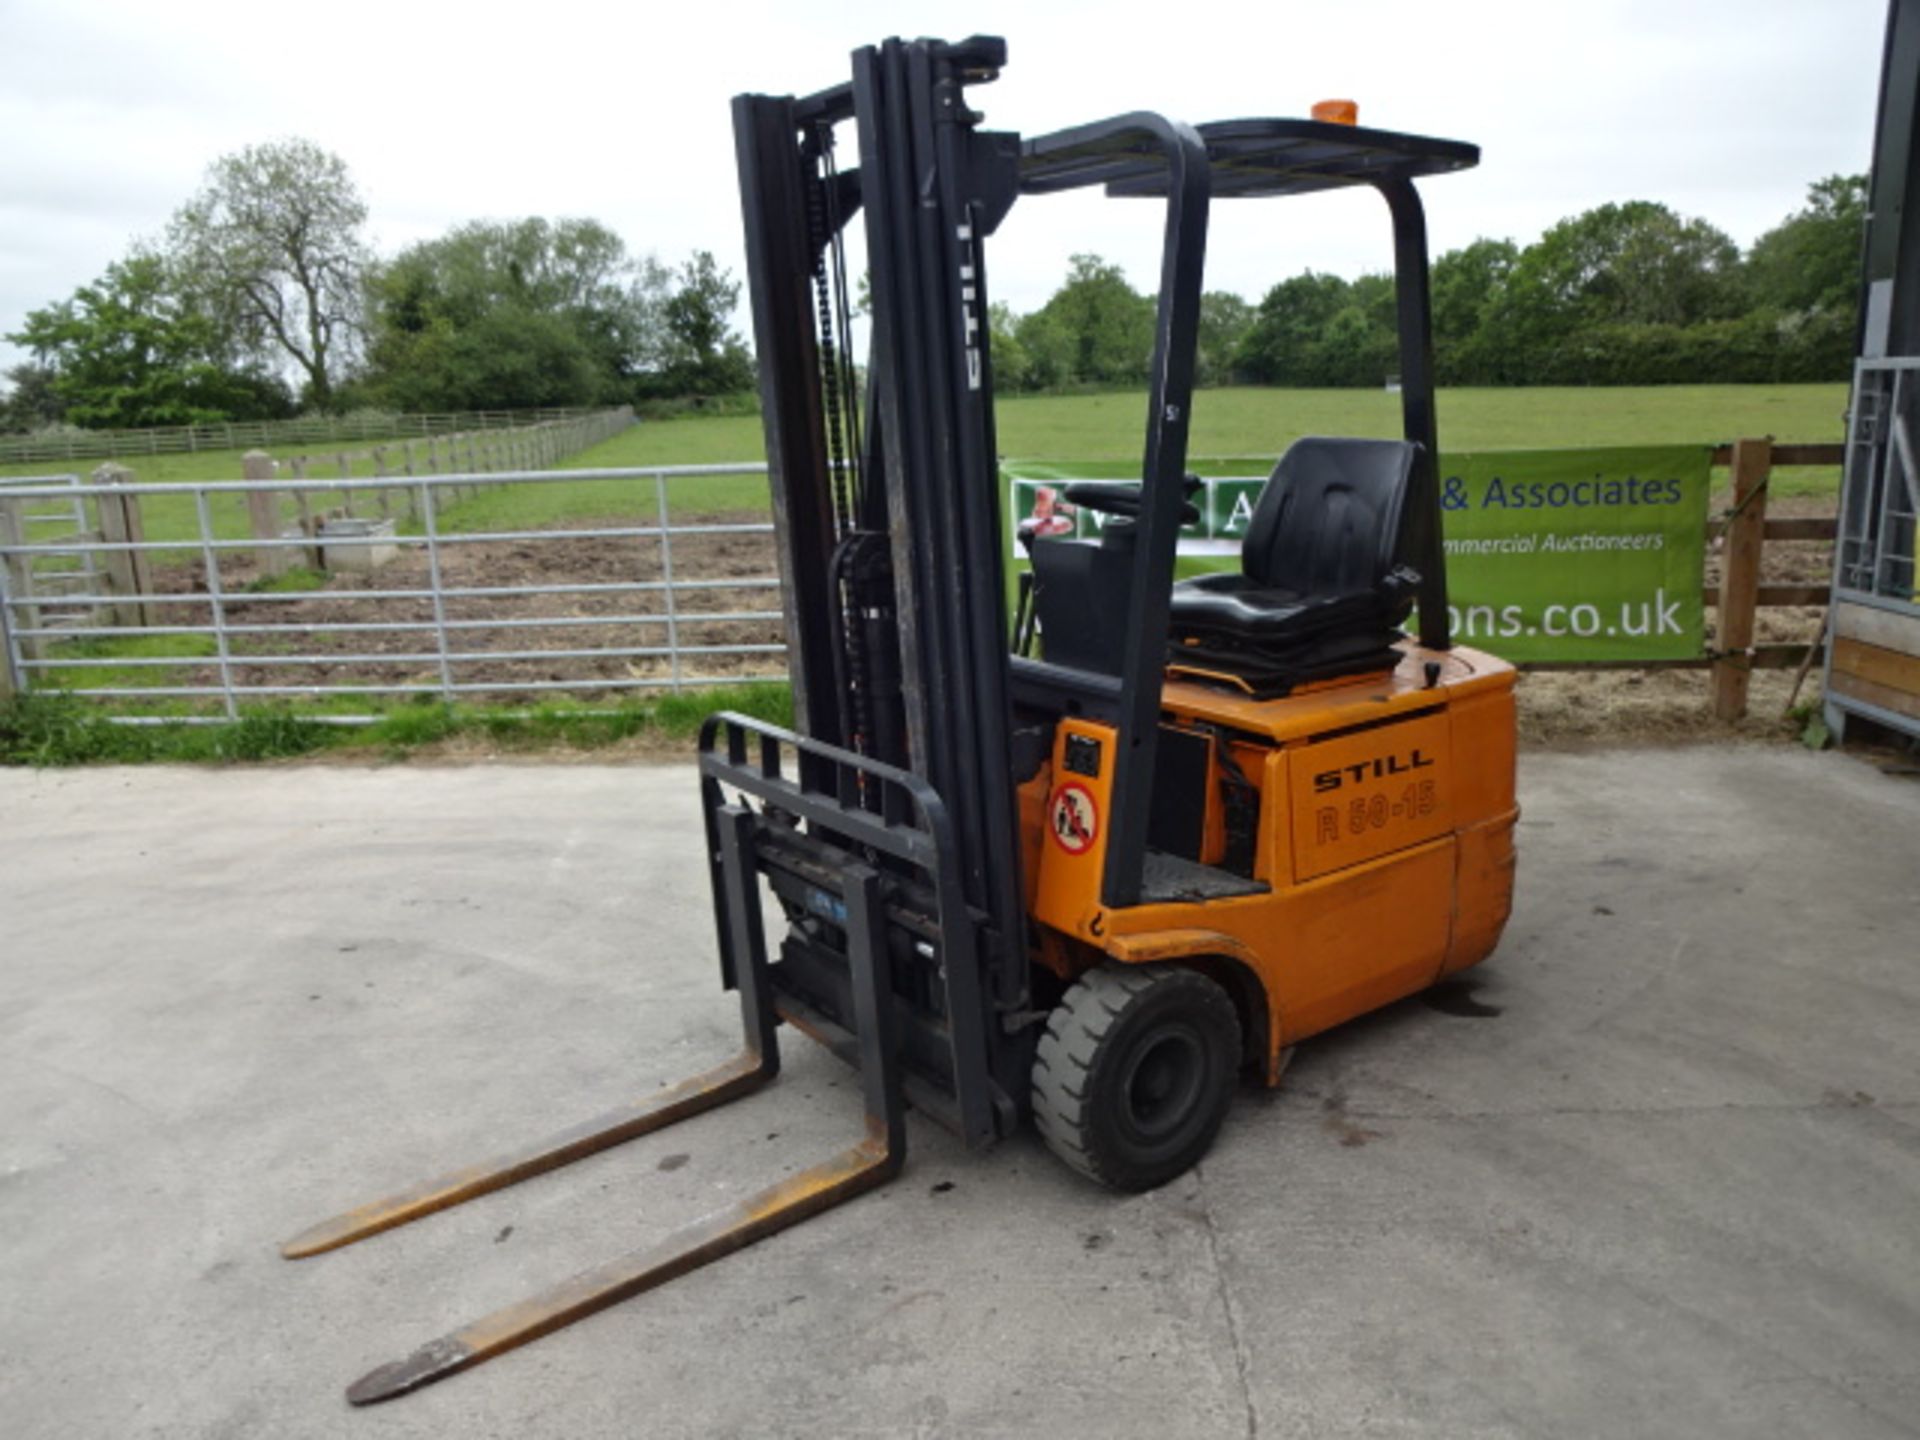 2000 STILL R50-15 1.5t battery driven forklift truck S/n: 515044022768 with triplex free-lift - Image 3 of 9